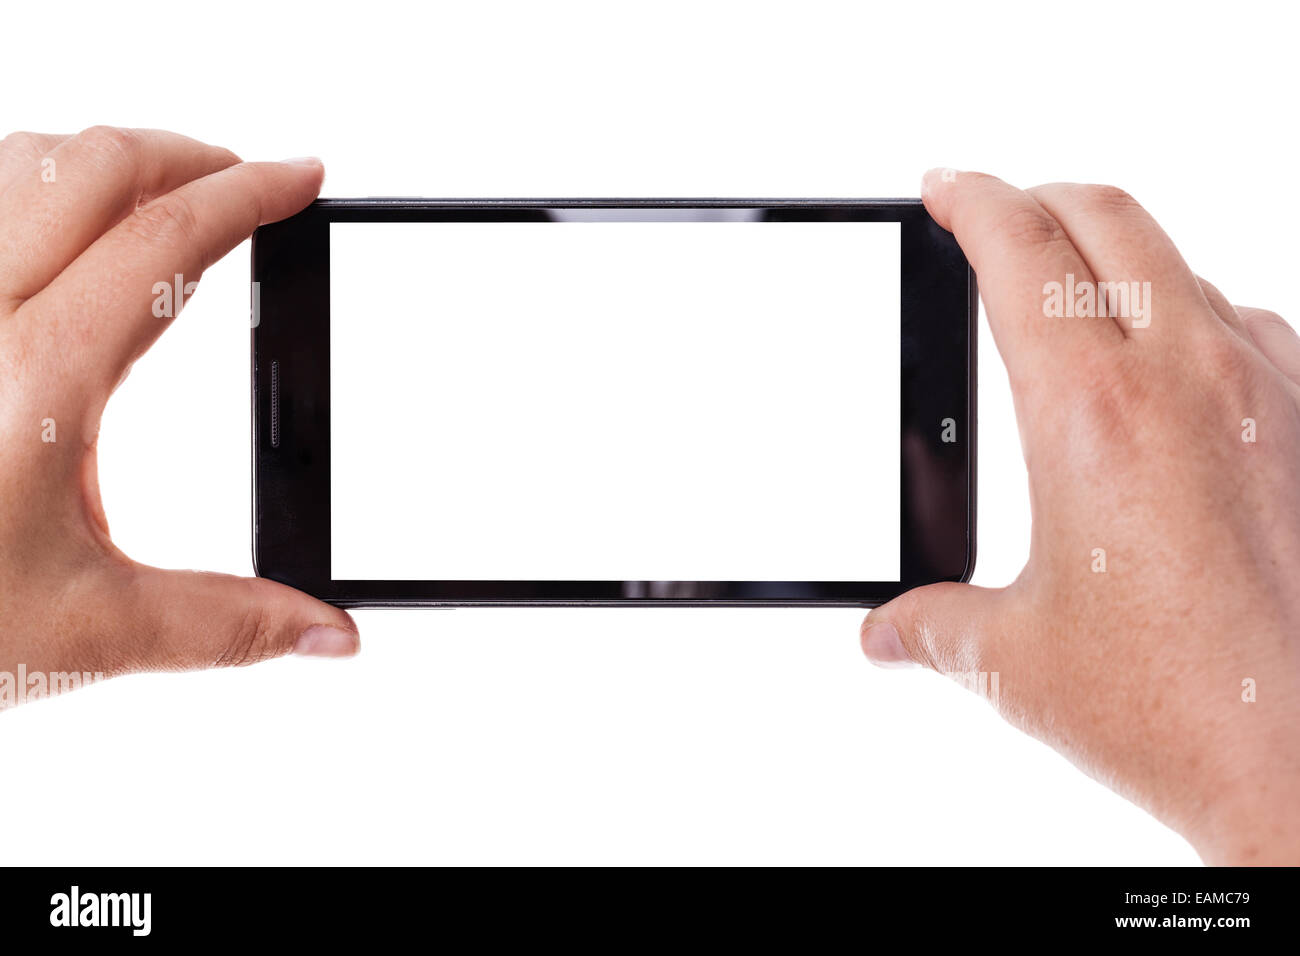 human hands taking photo with a mobile phone isolated over a white background Stock Photo